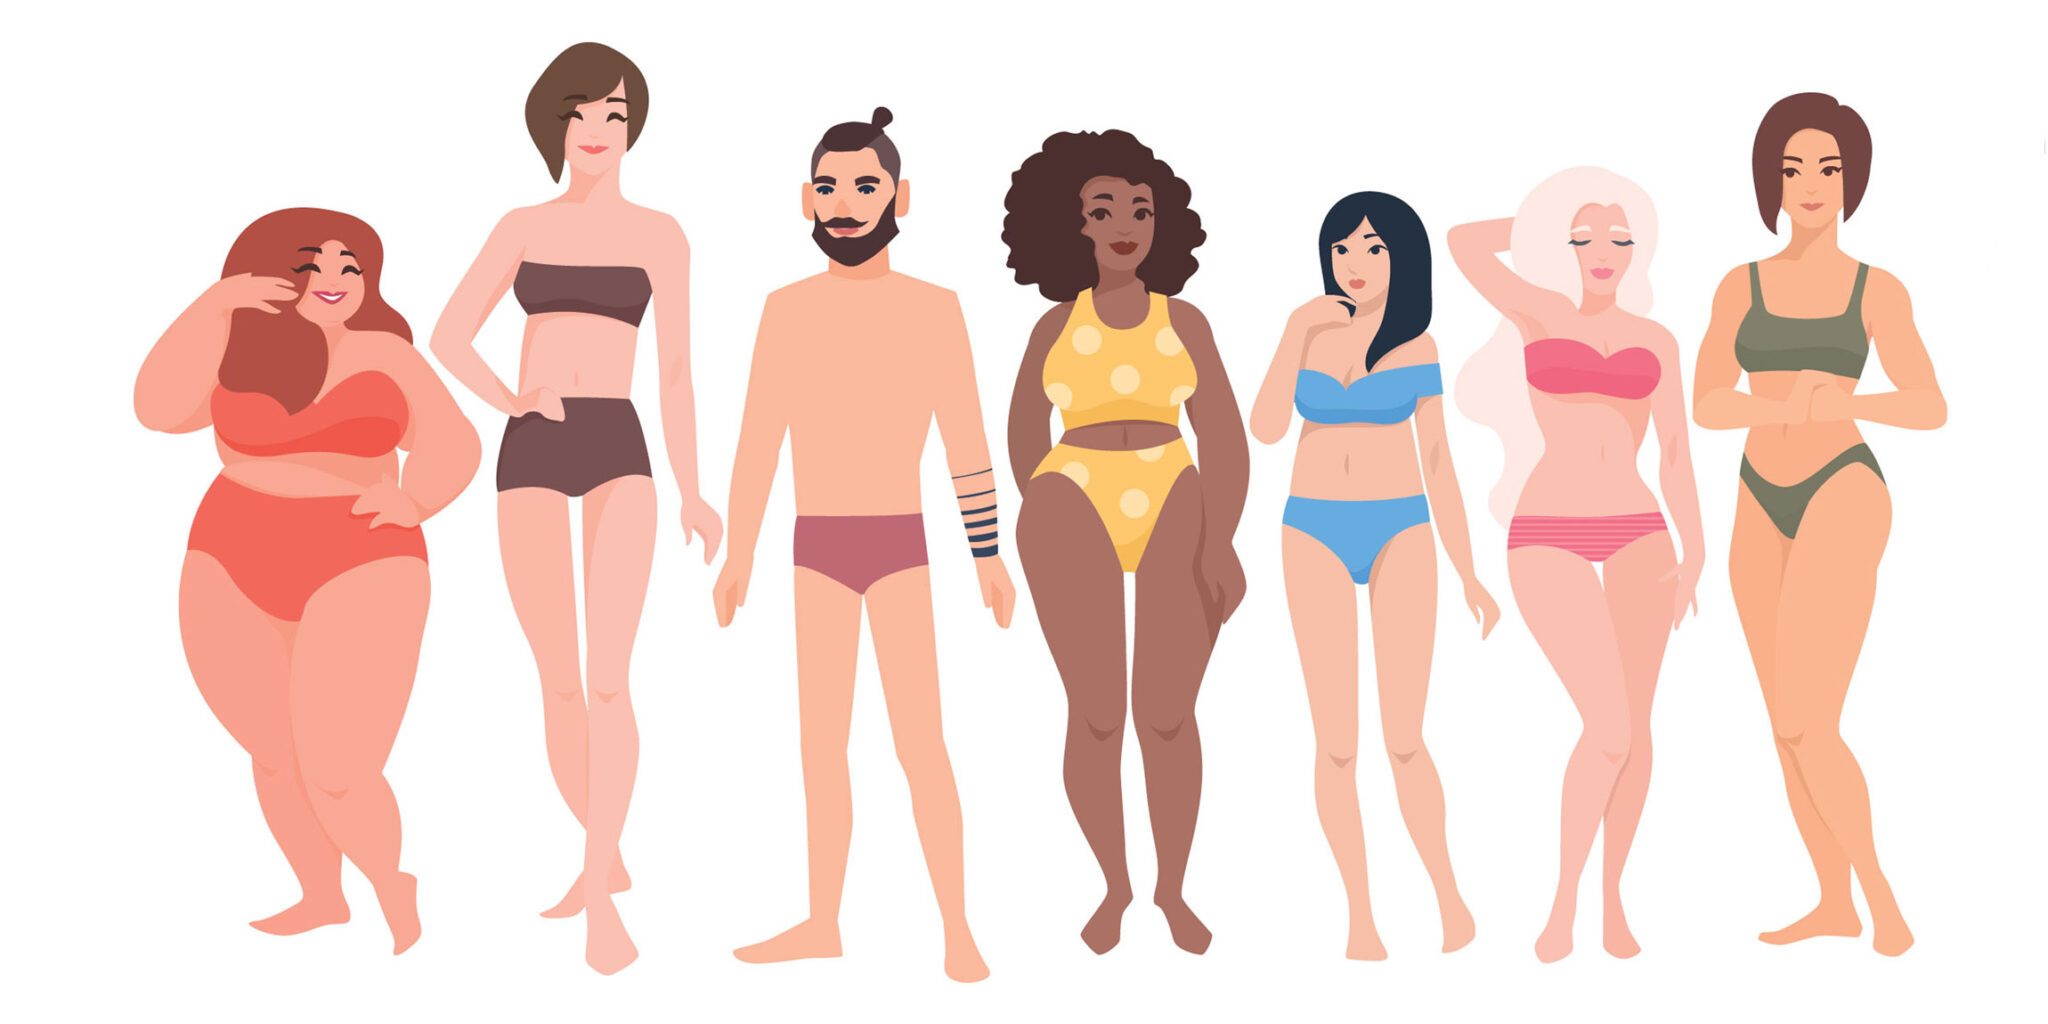 The Body Positivity Blog - When size matters